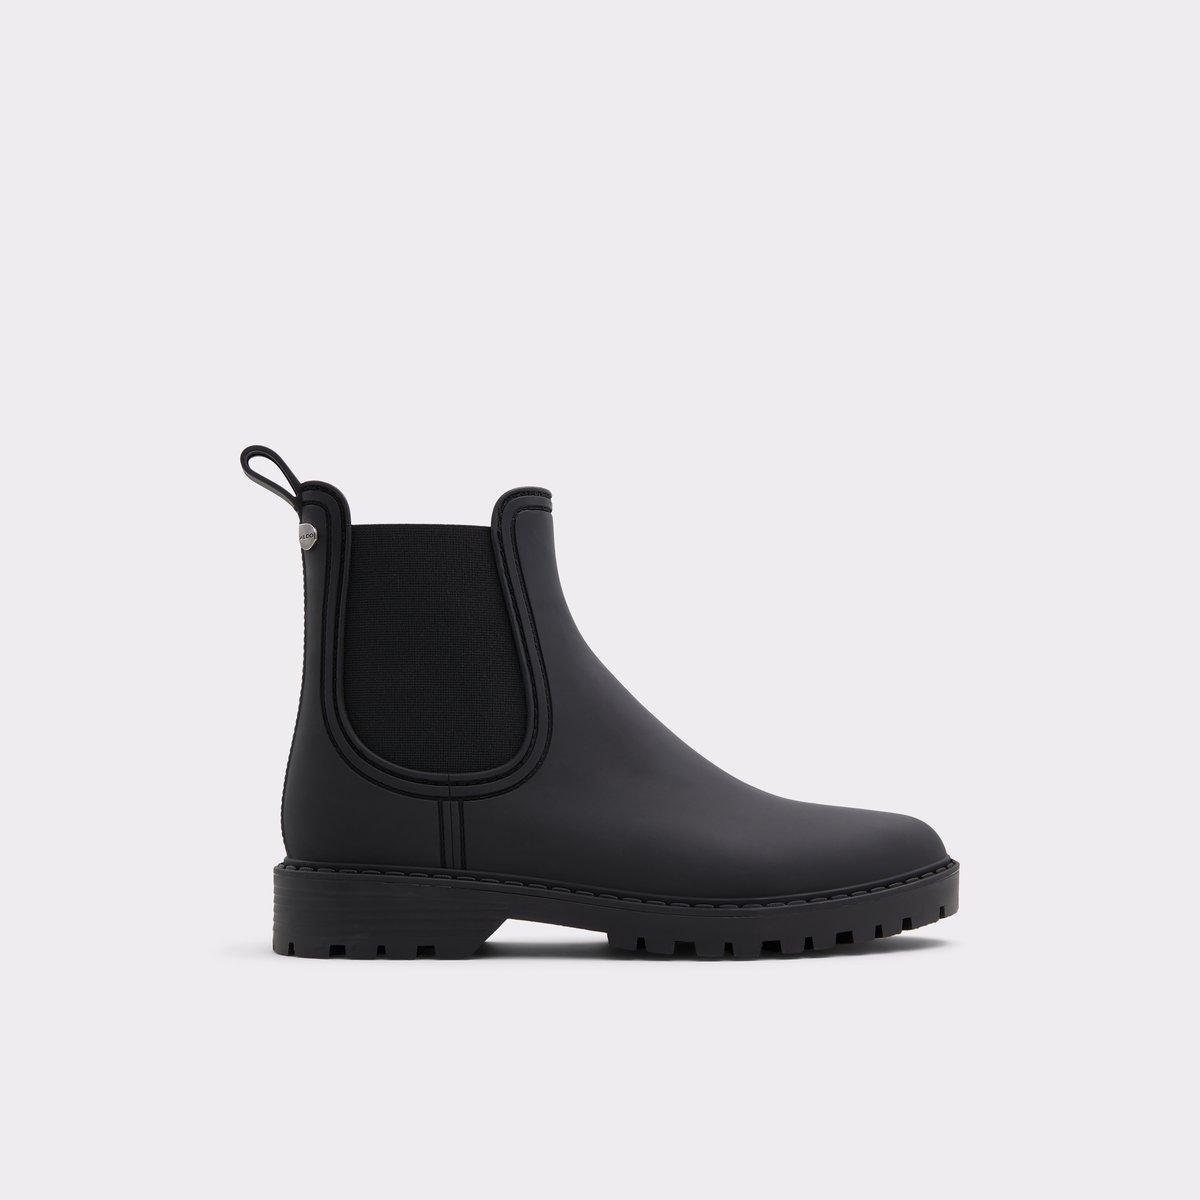 Storm Other Black Synthetic Rubber Women's Winter boots | ALDO Canada